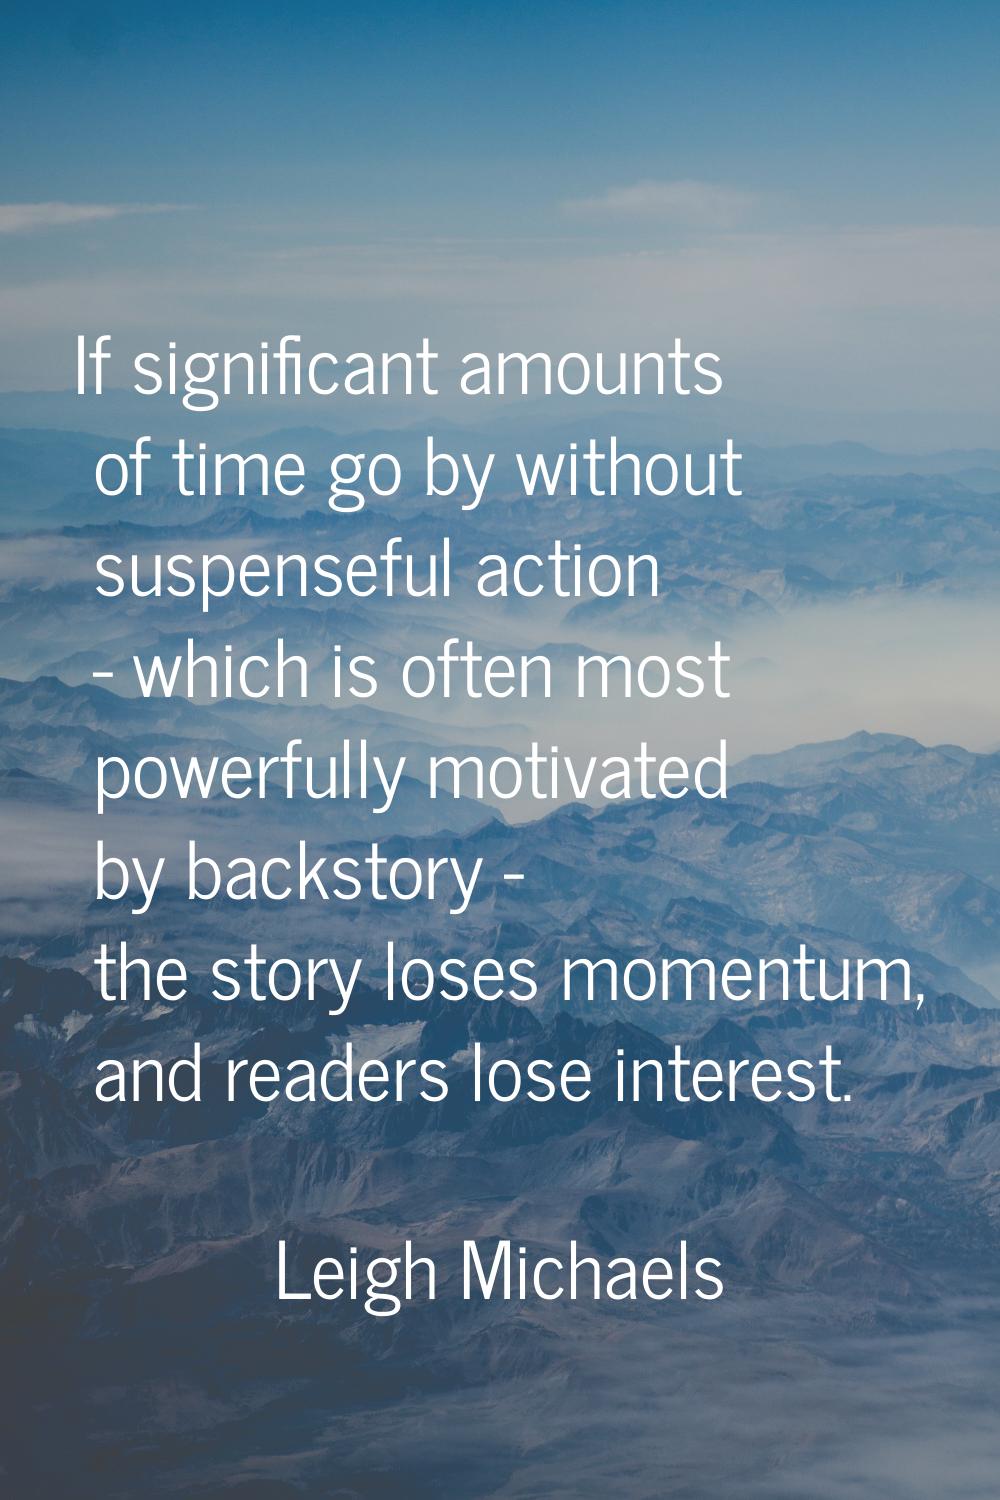 If significant amounts of time go by without suspenseful action - which is often most powerfully mo